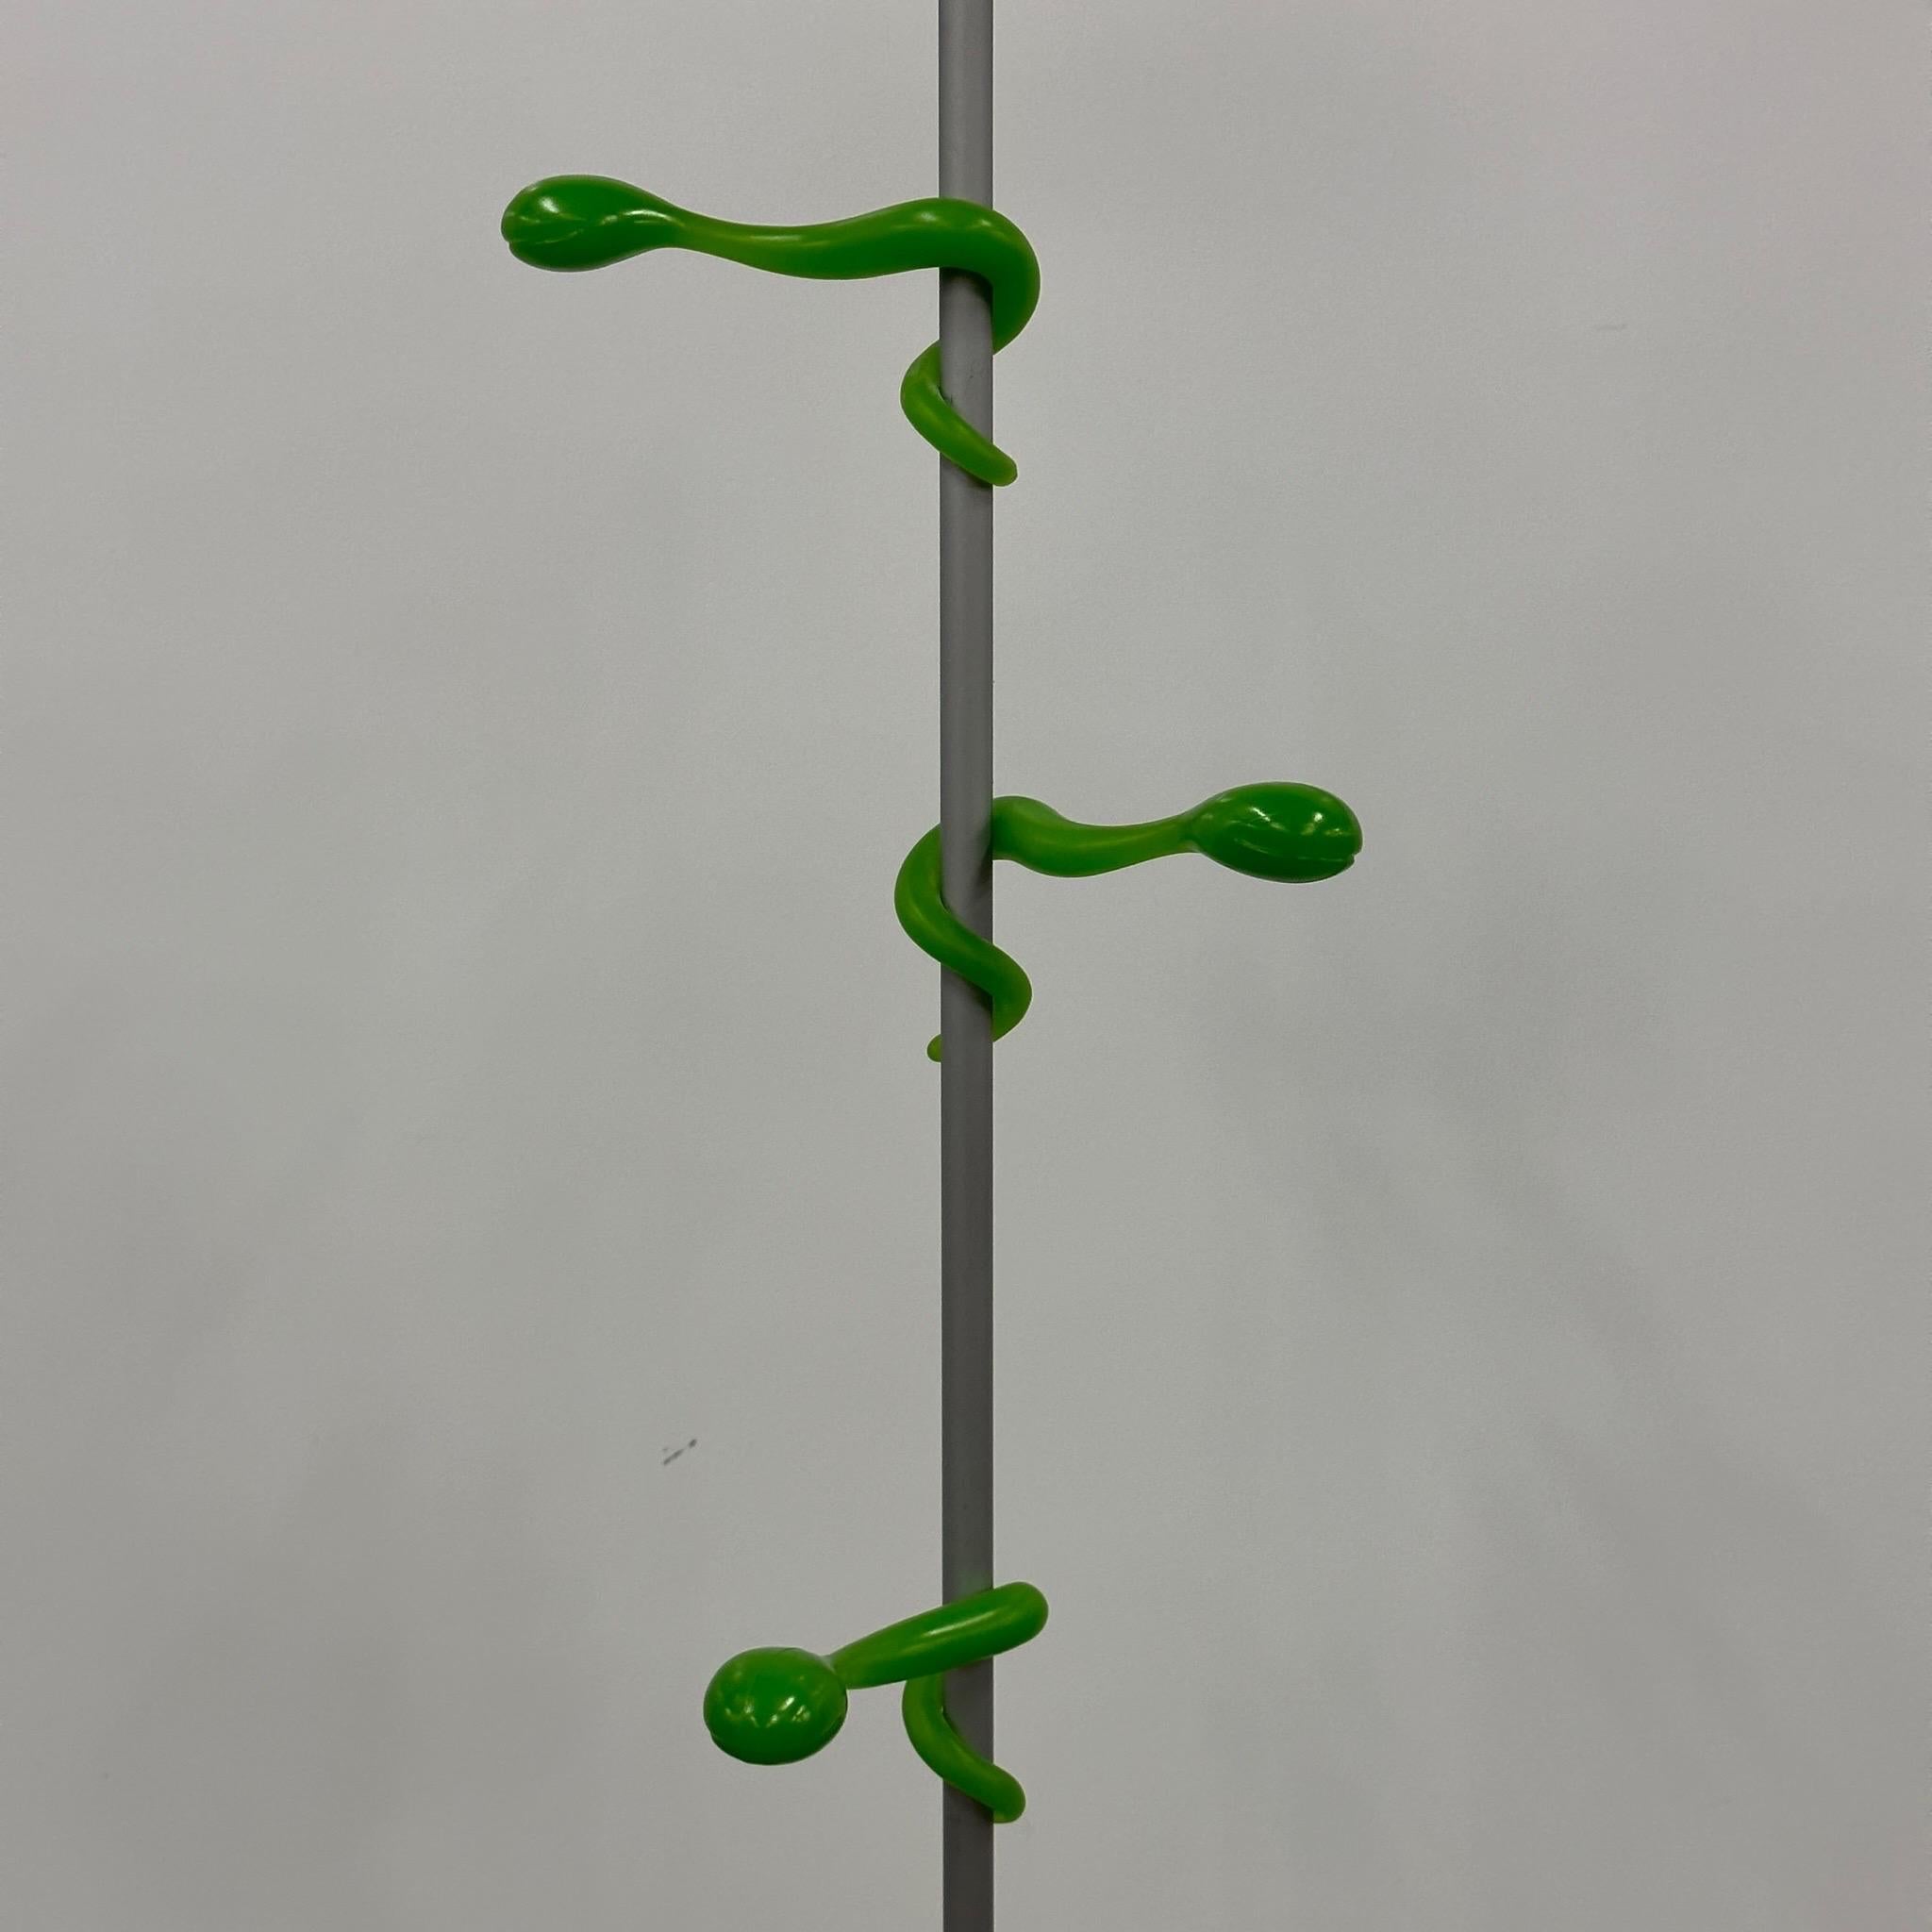 c. 1990s. Fun plastic coat rack made in Germany. Each hanger is moveable on the pole. Base is good for additional storage. 